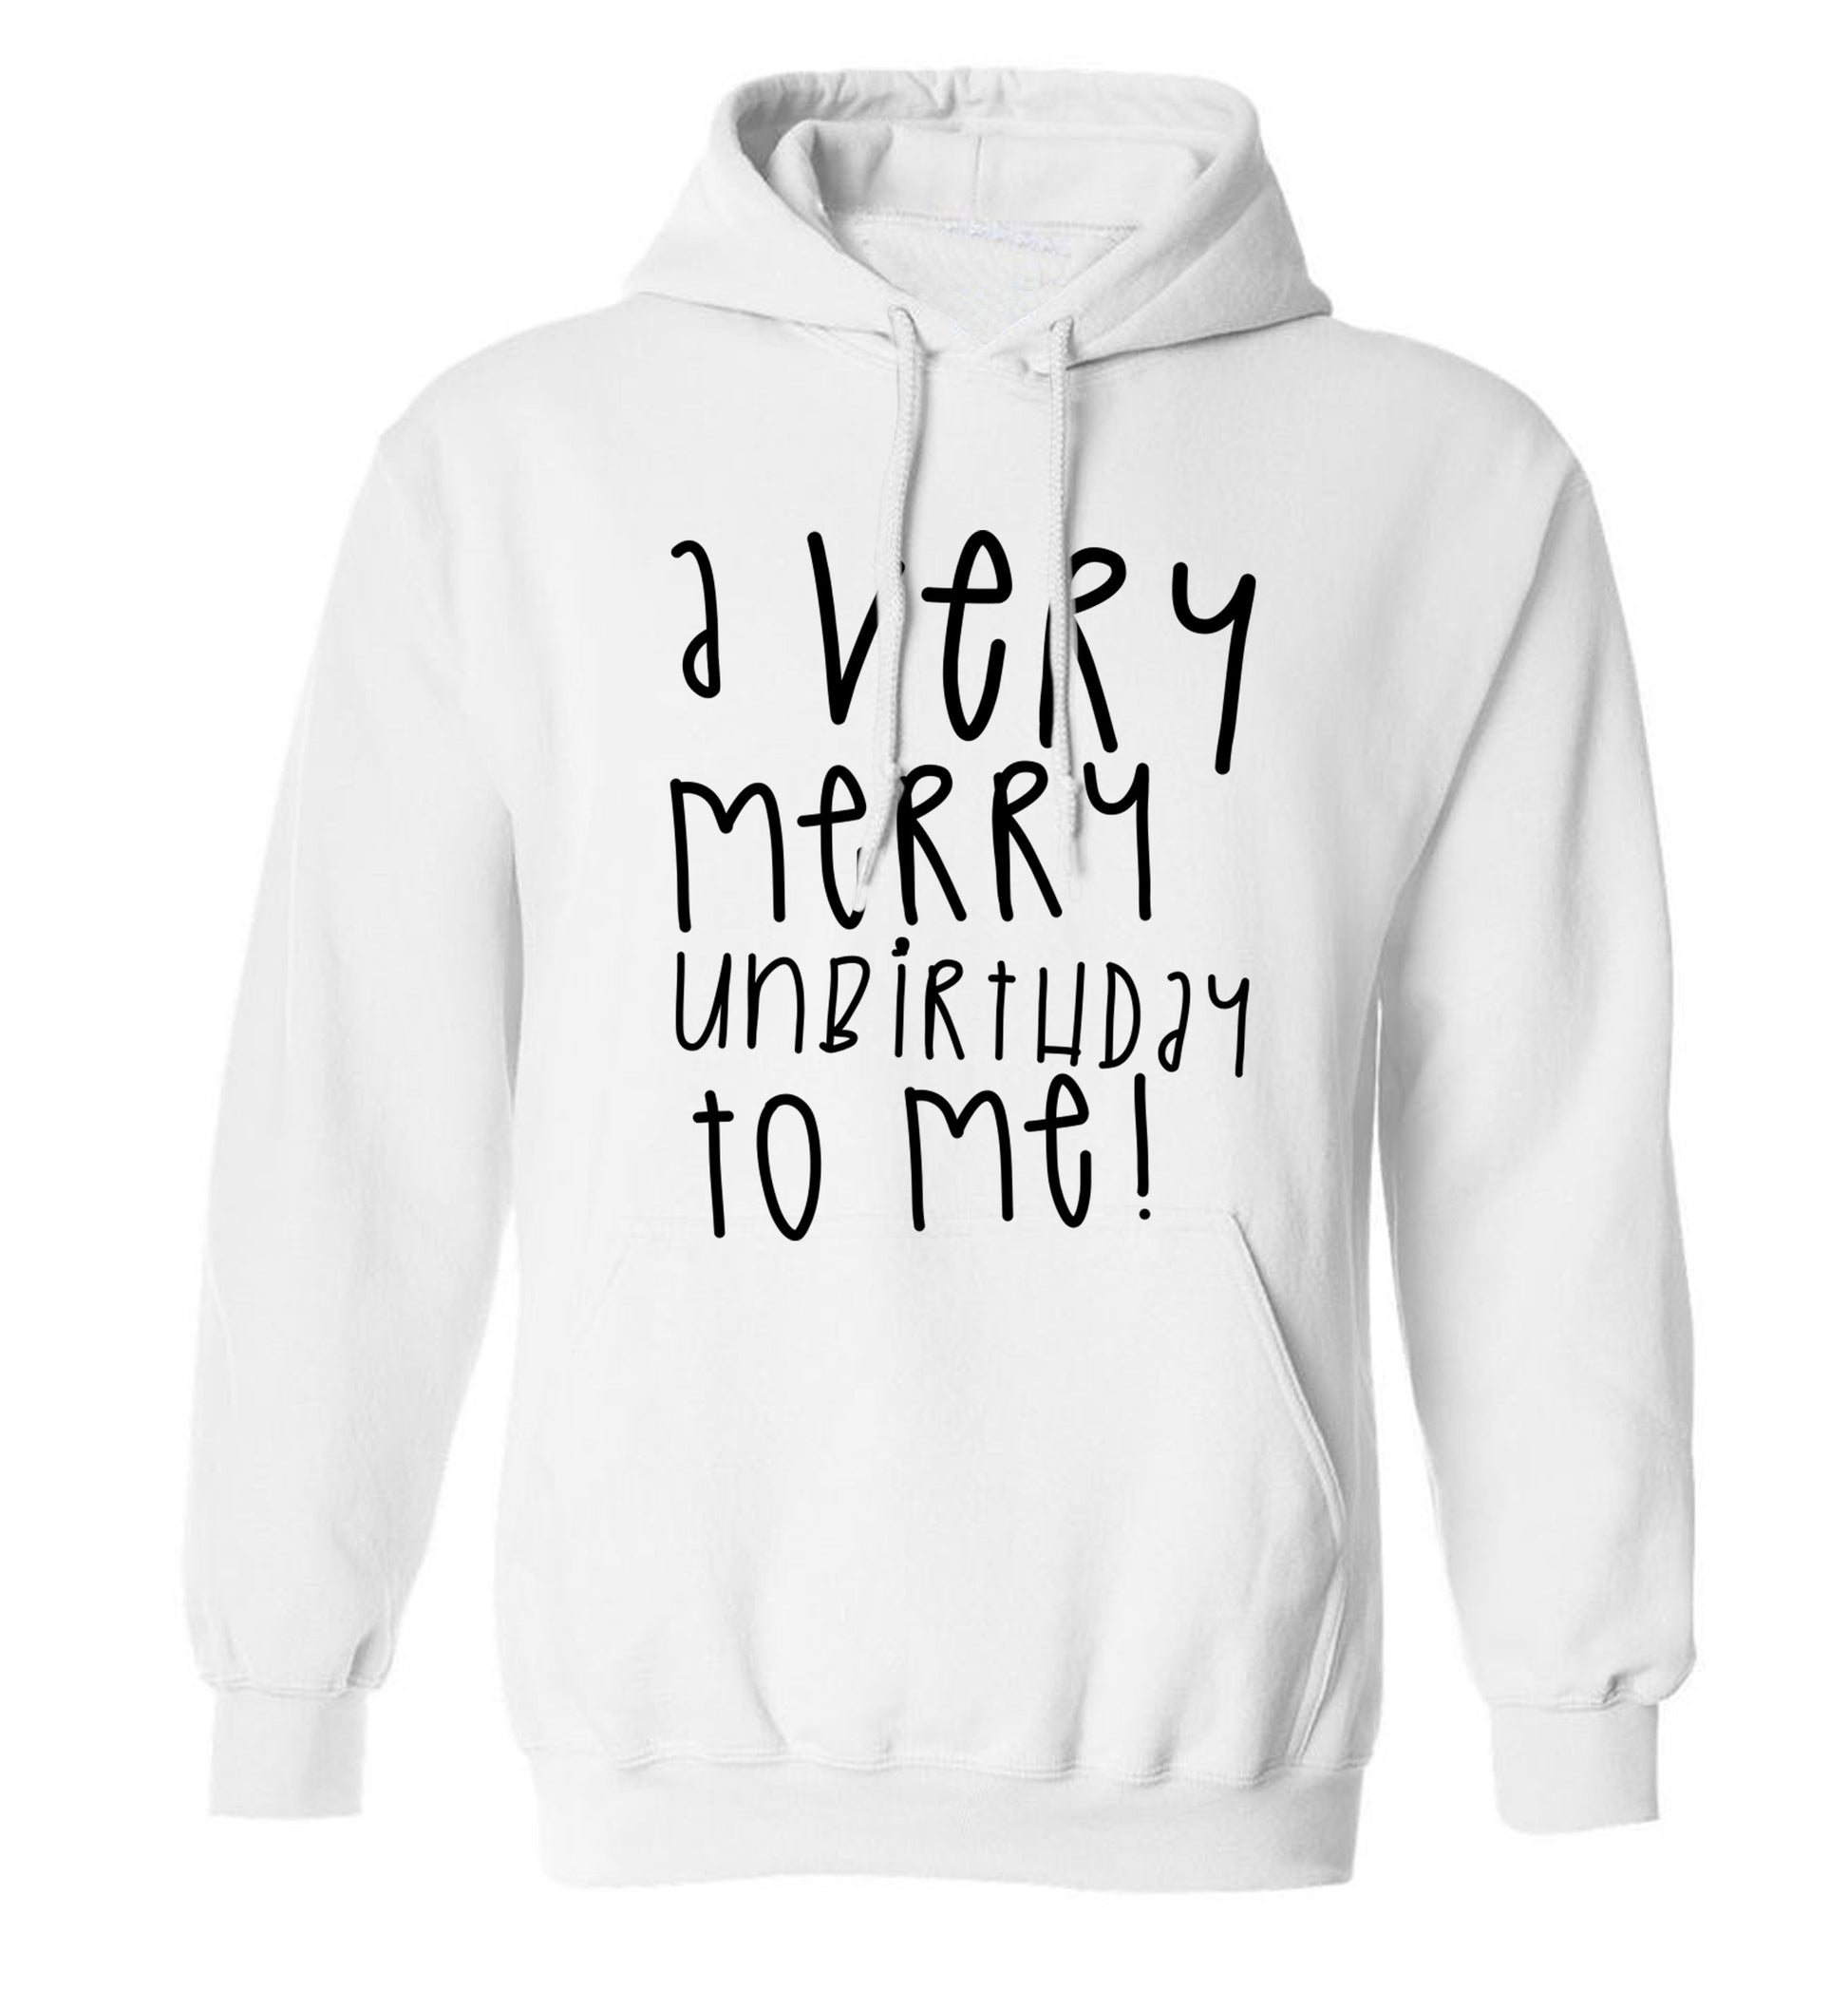 A very merry unbirthday to me! adults unisex white hoodie 2XL